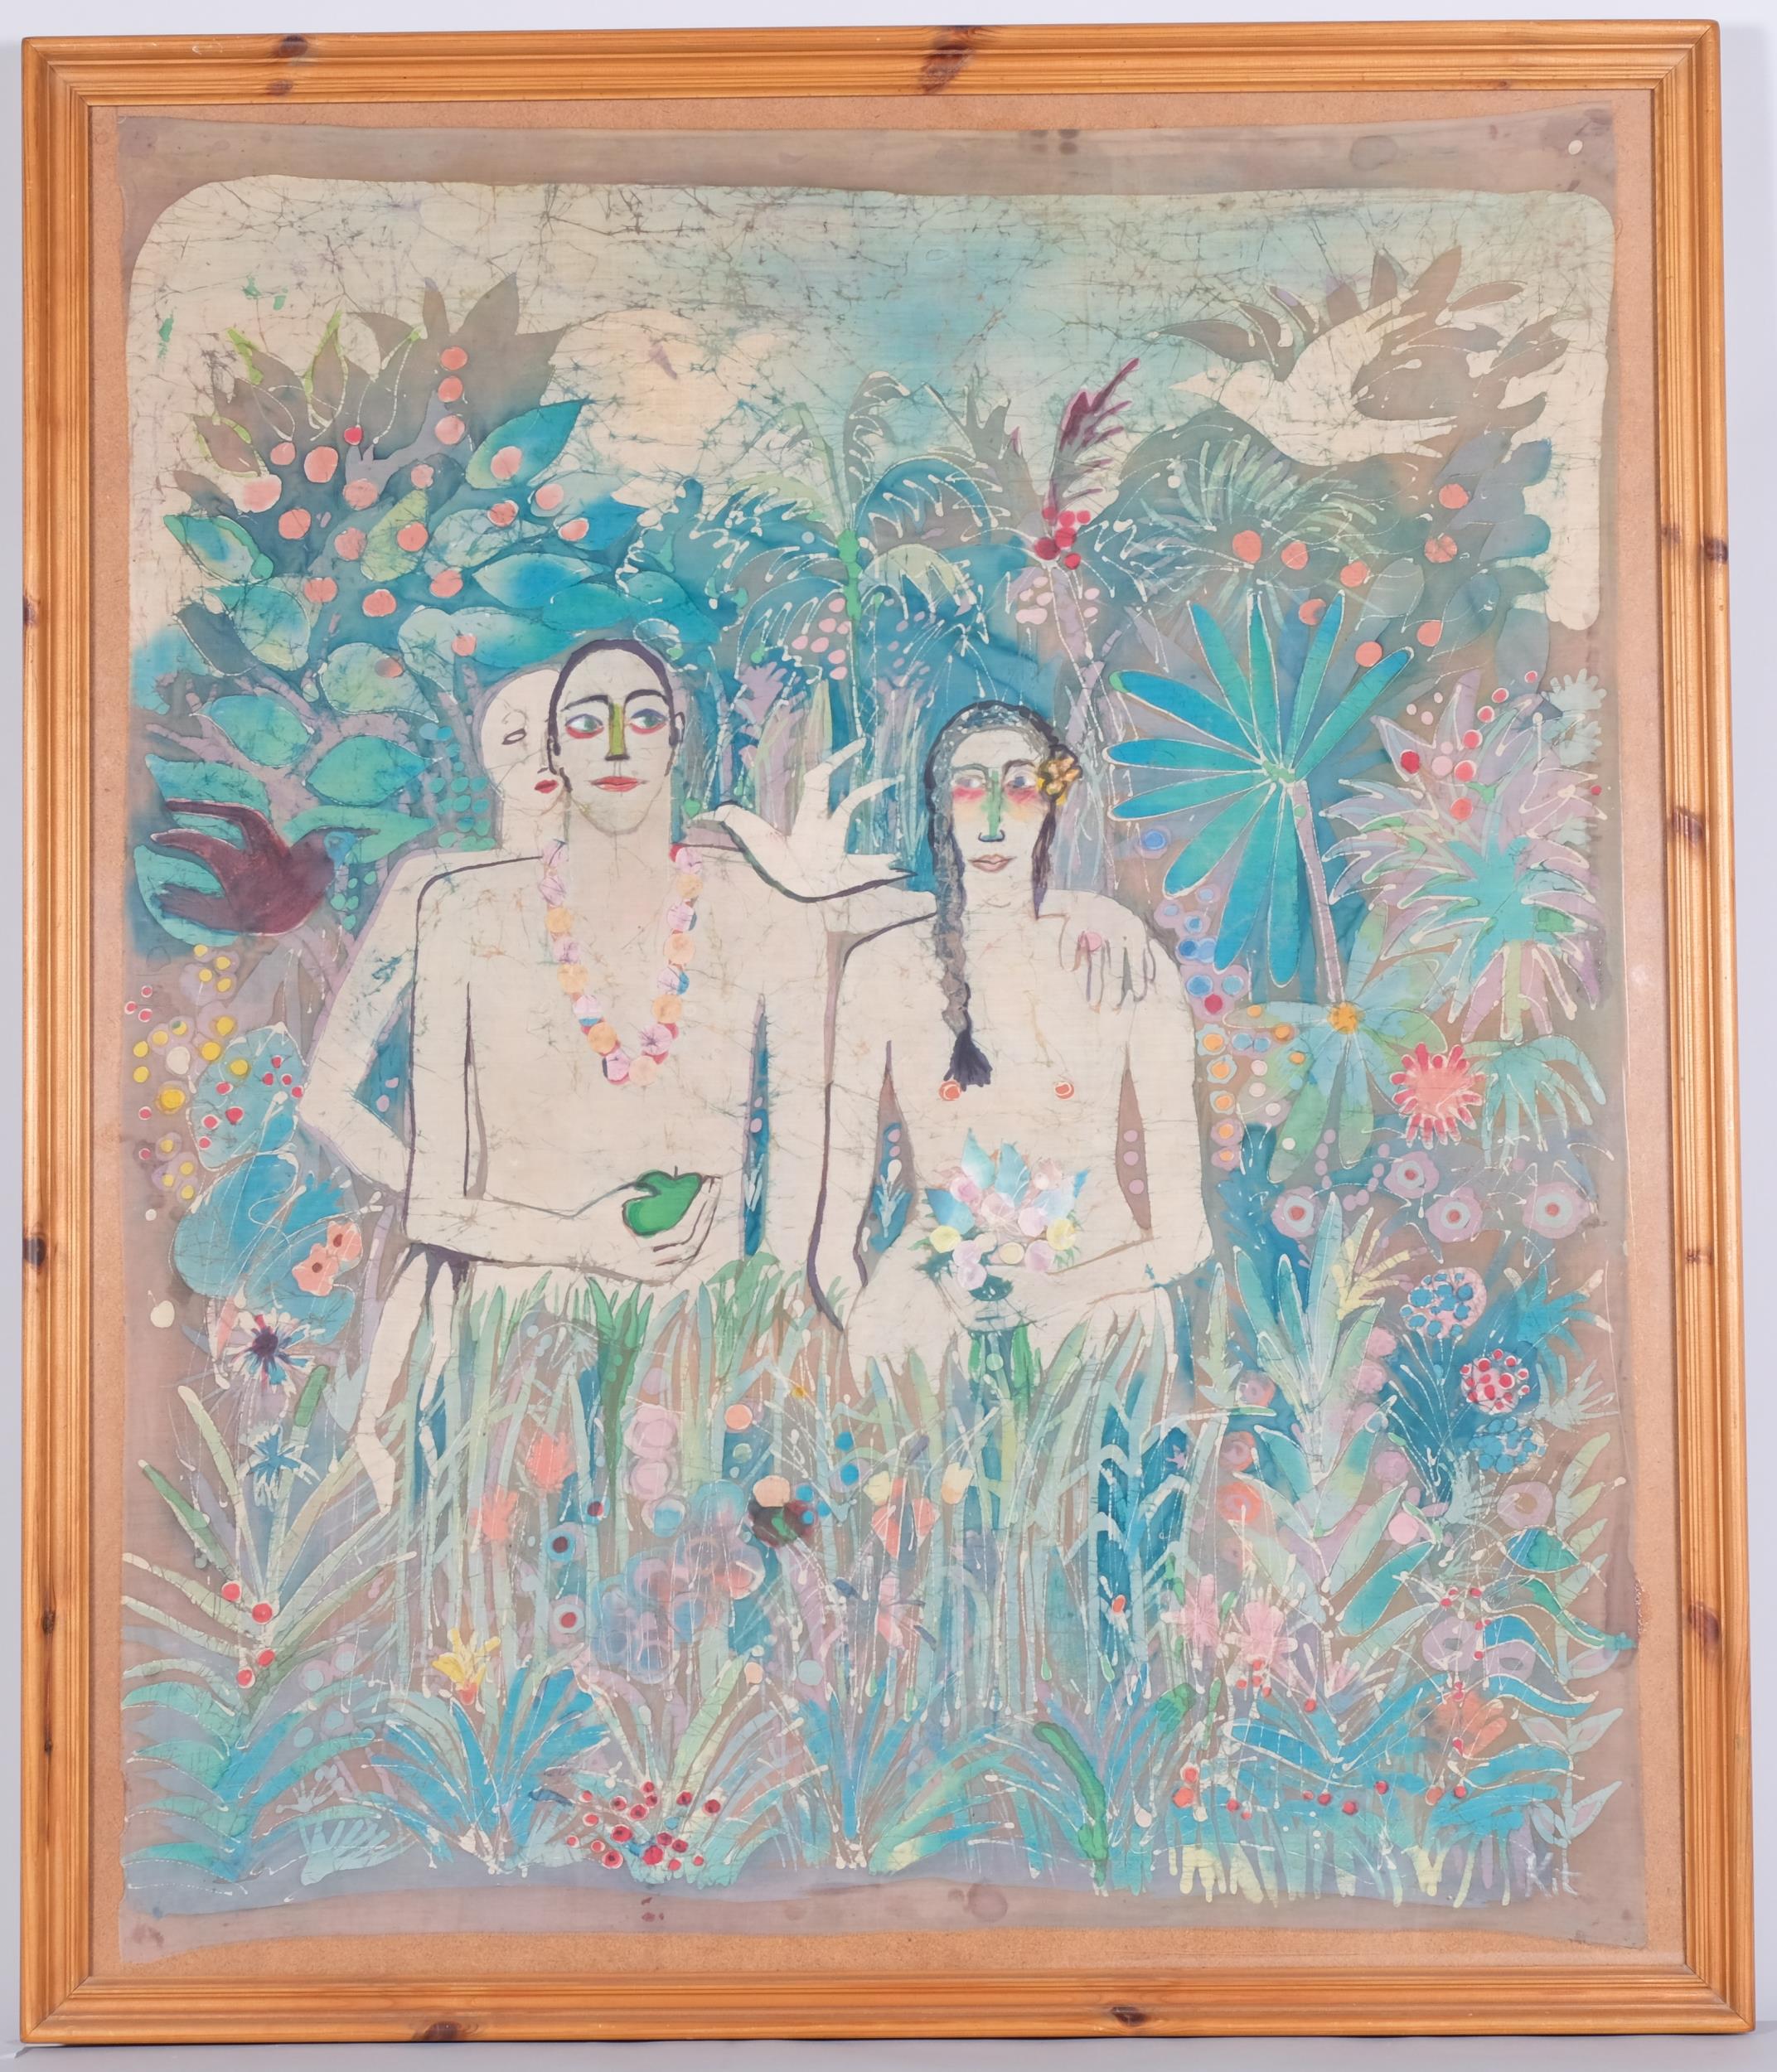 Kitty French (1929 - 1989), Adam and Eve, wax resist painting on fabric, framed with Exhibition